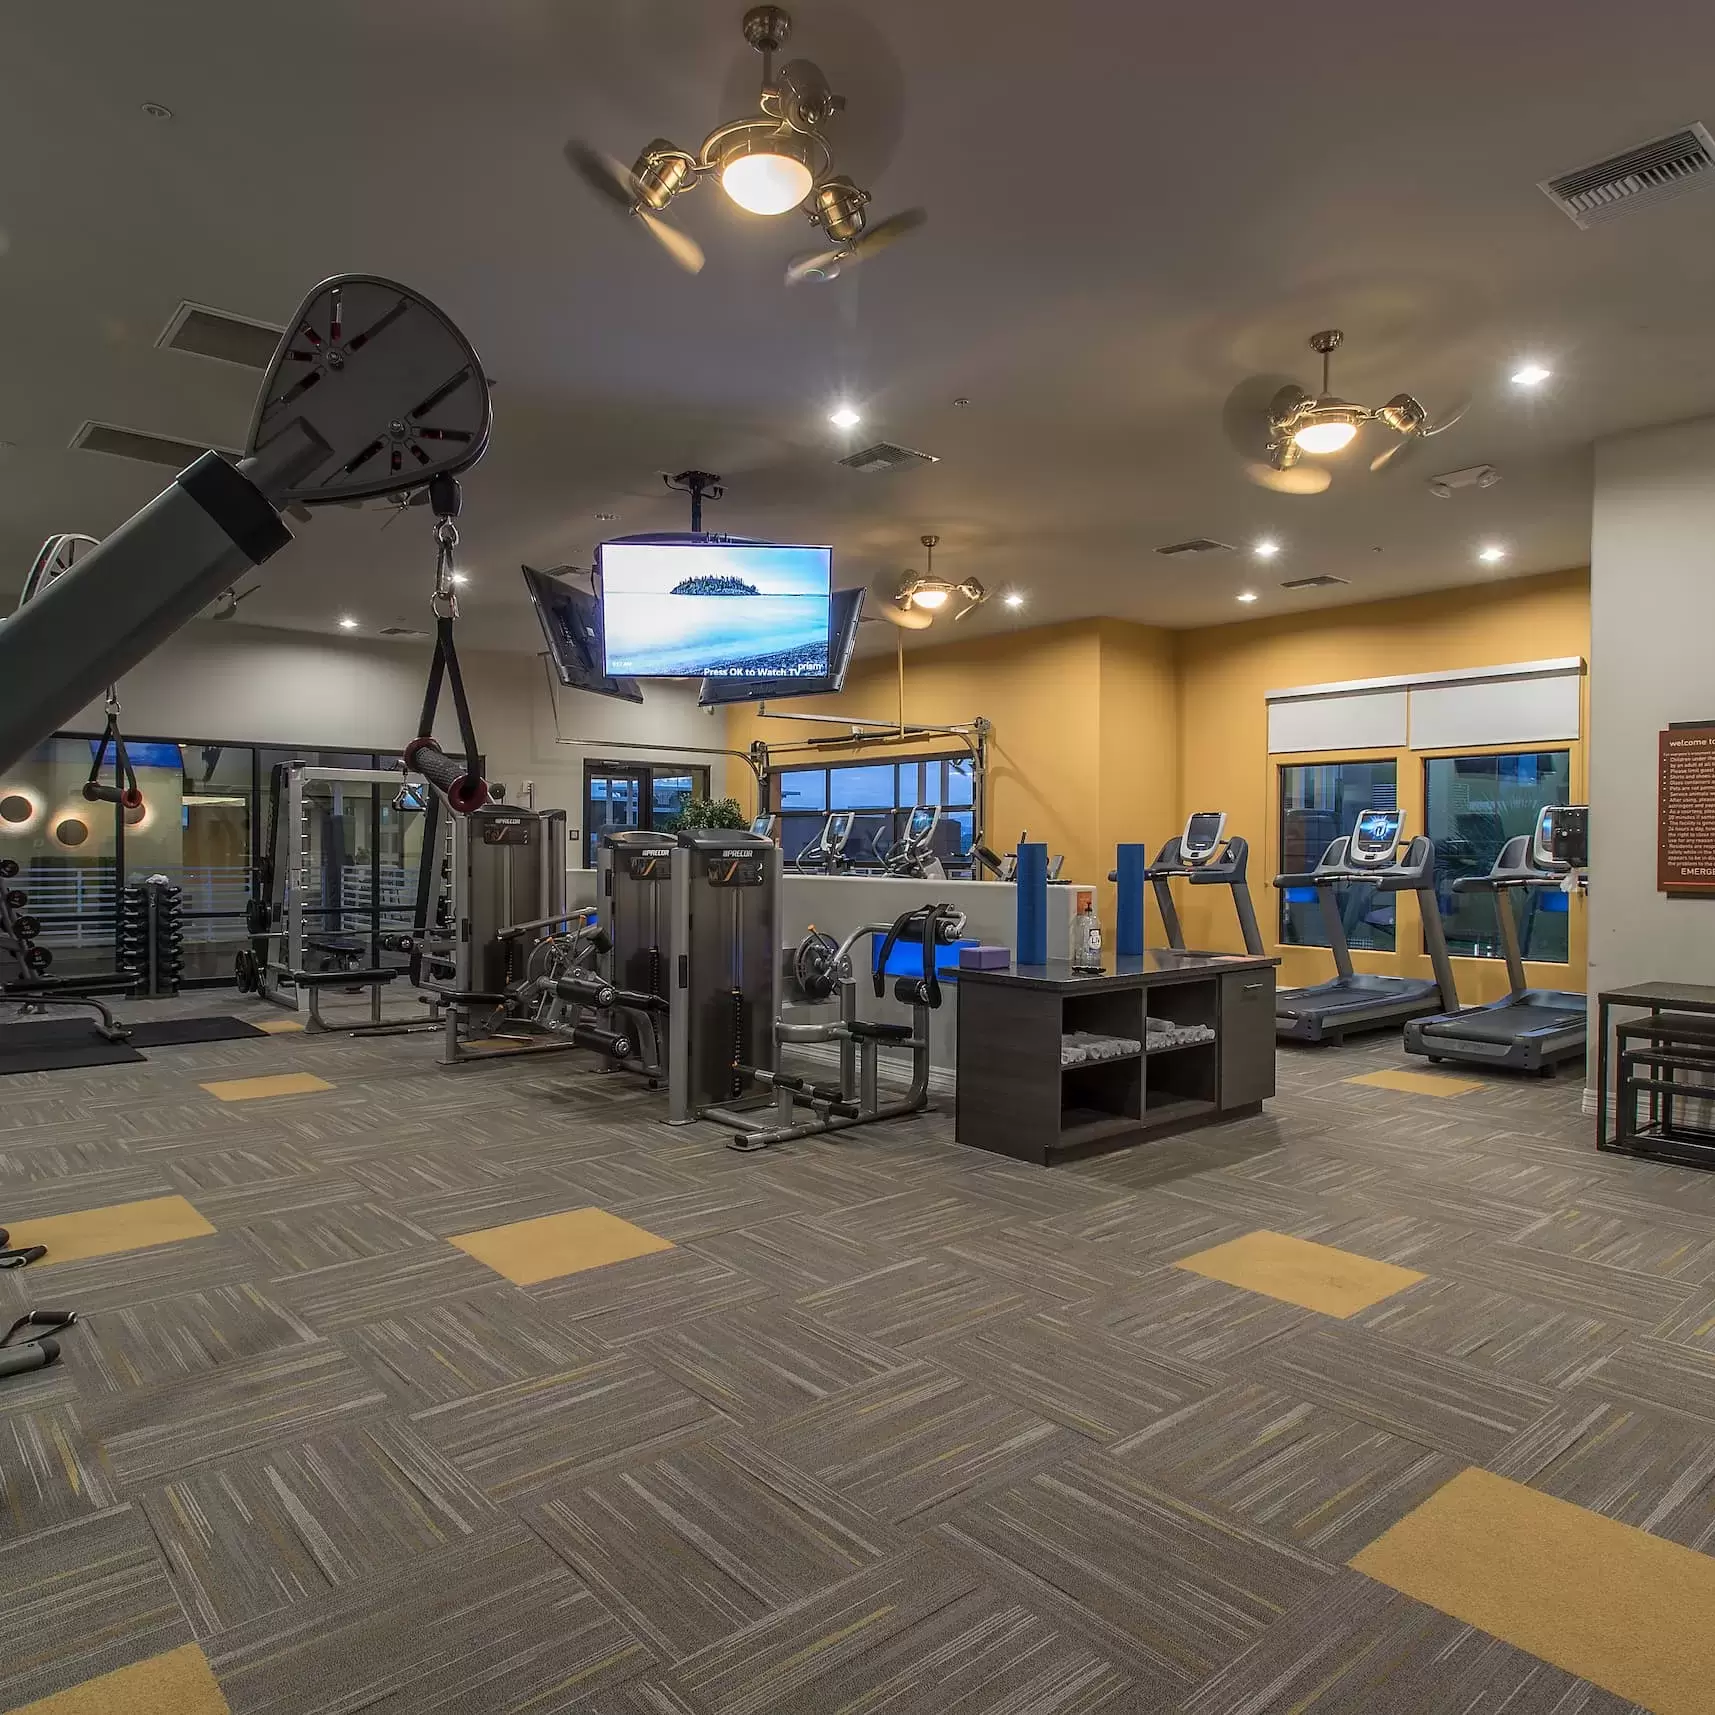 A view of the gym at Liv Northgate, with a variety of exercise machines and weights.